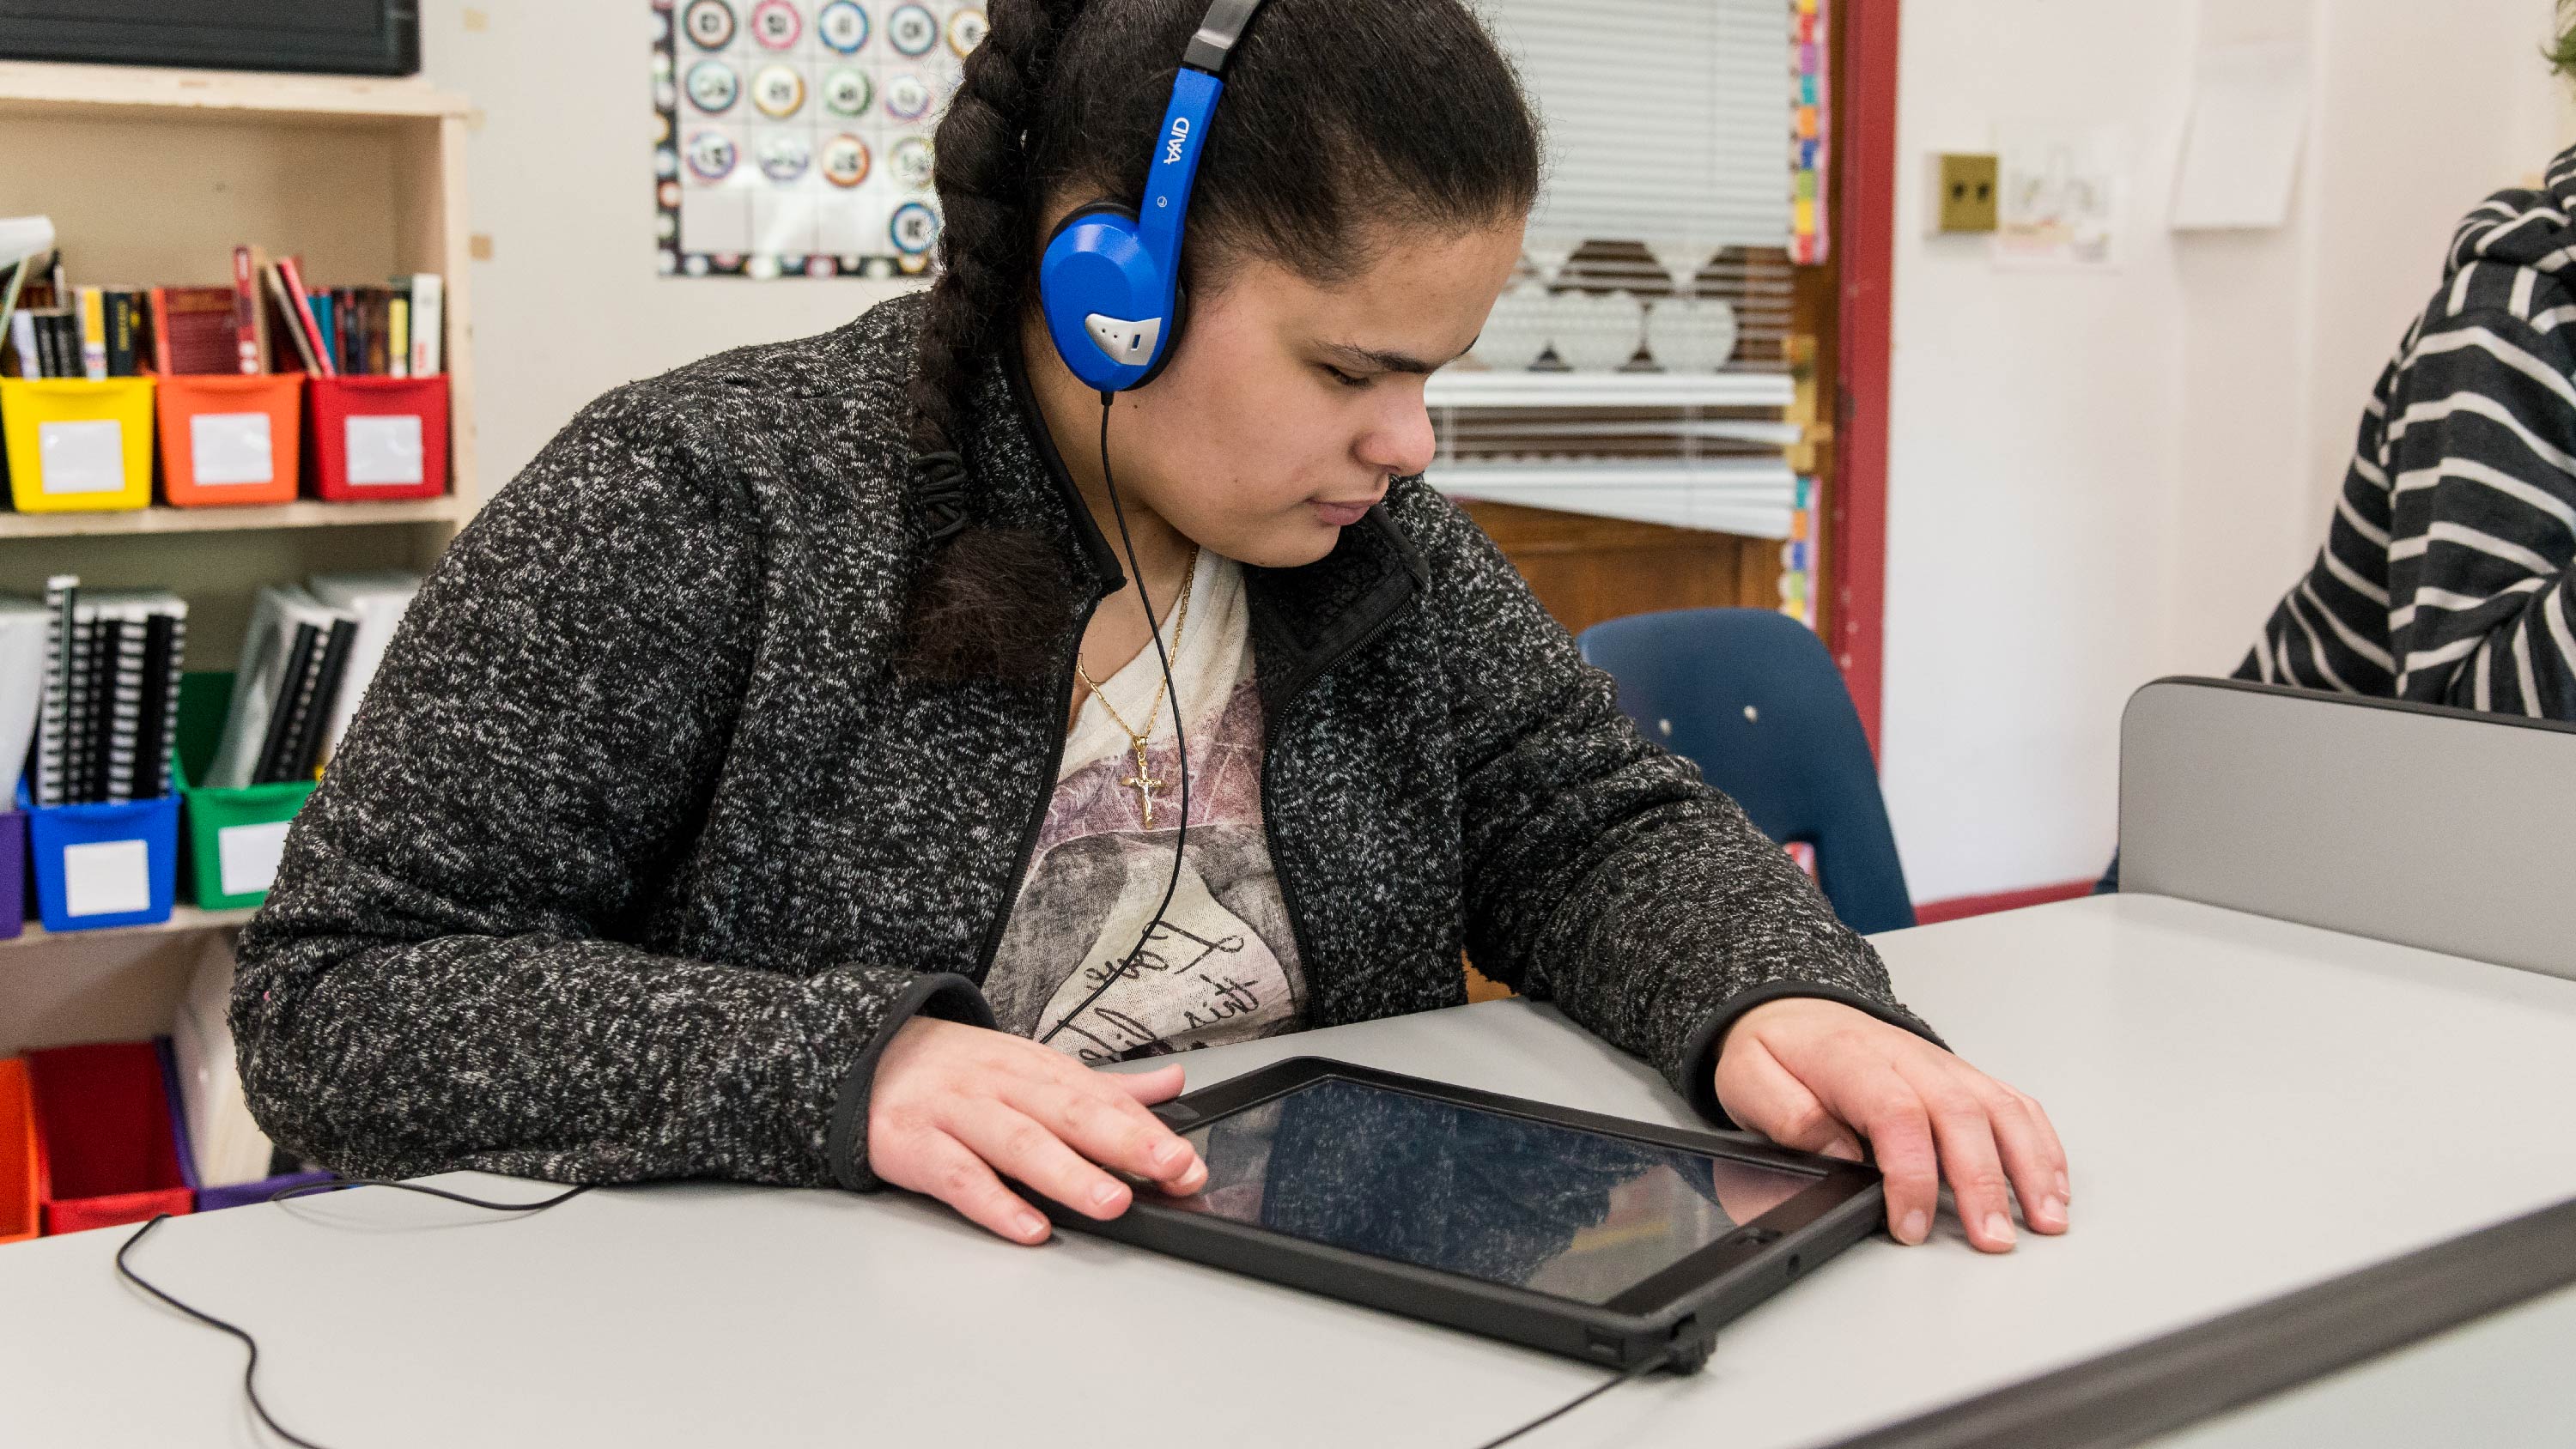 A student wearing headphones using a screen reader on her iPad